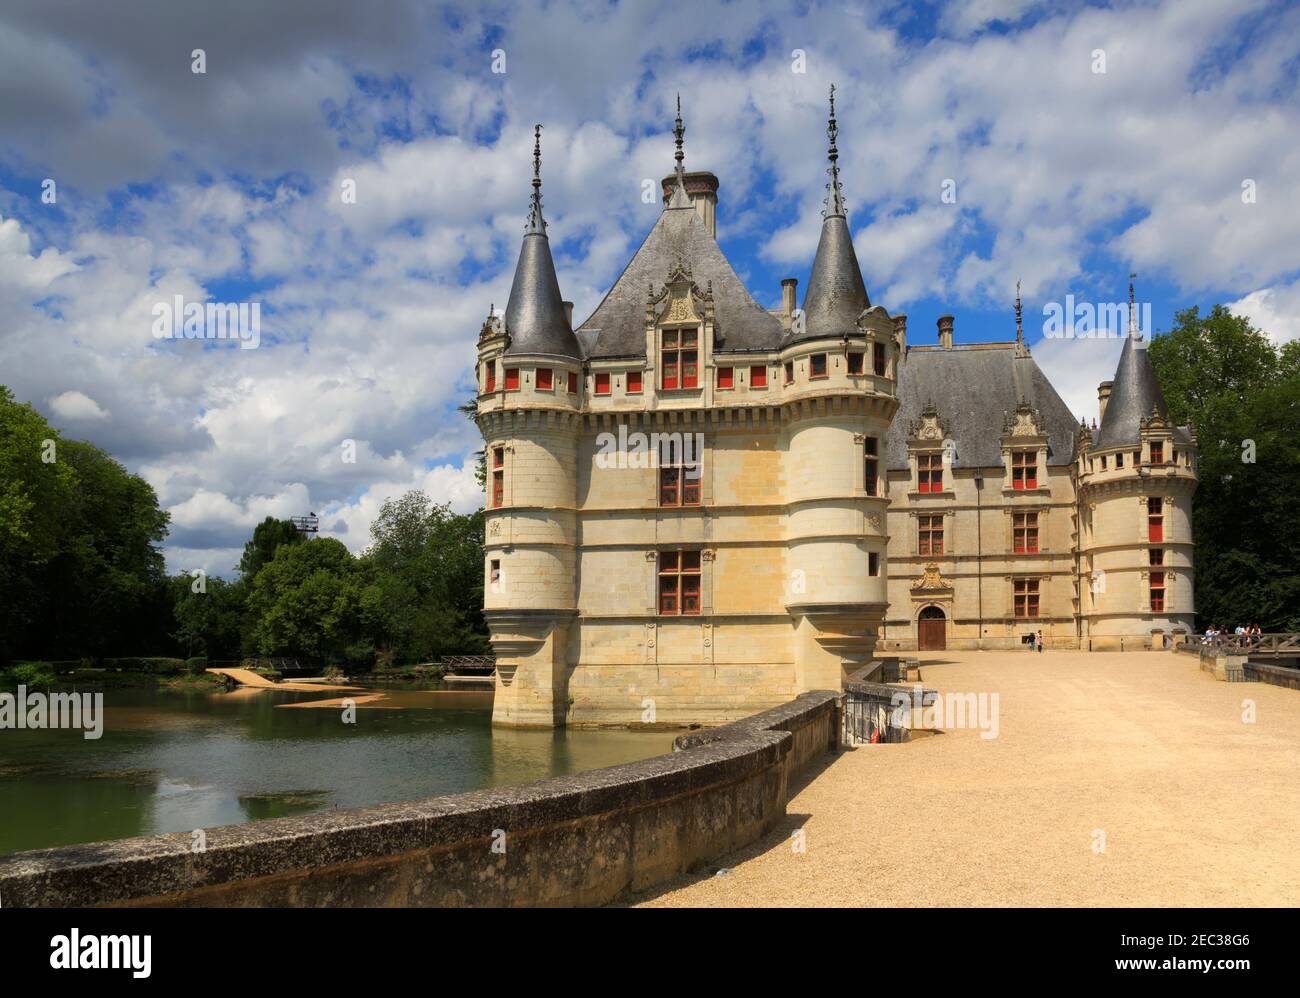 Chateau of Azay-le-Rideau, France. Built in the reign of Francois I by Gilles Berthelot, one of the earliest Renaissance chateaux. Stock Photo